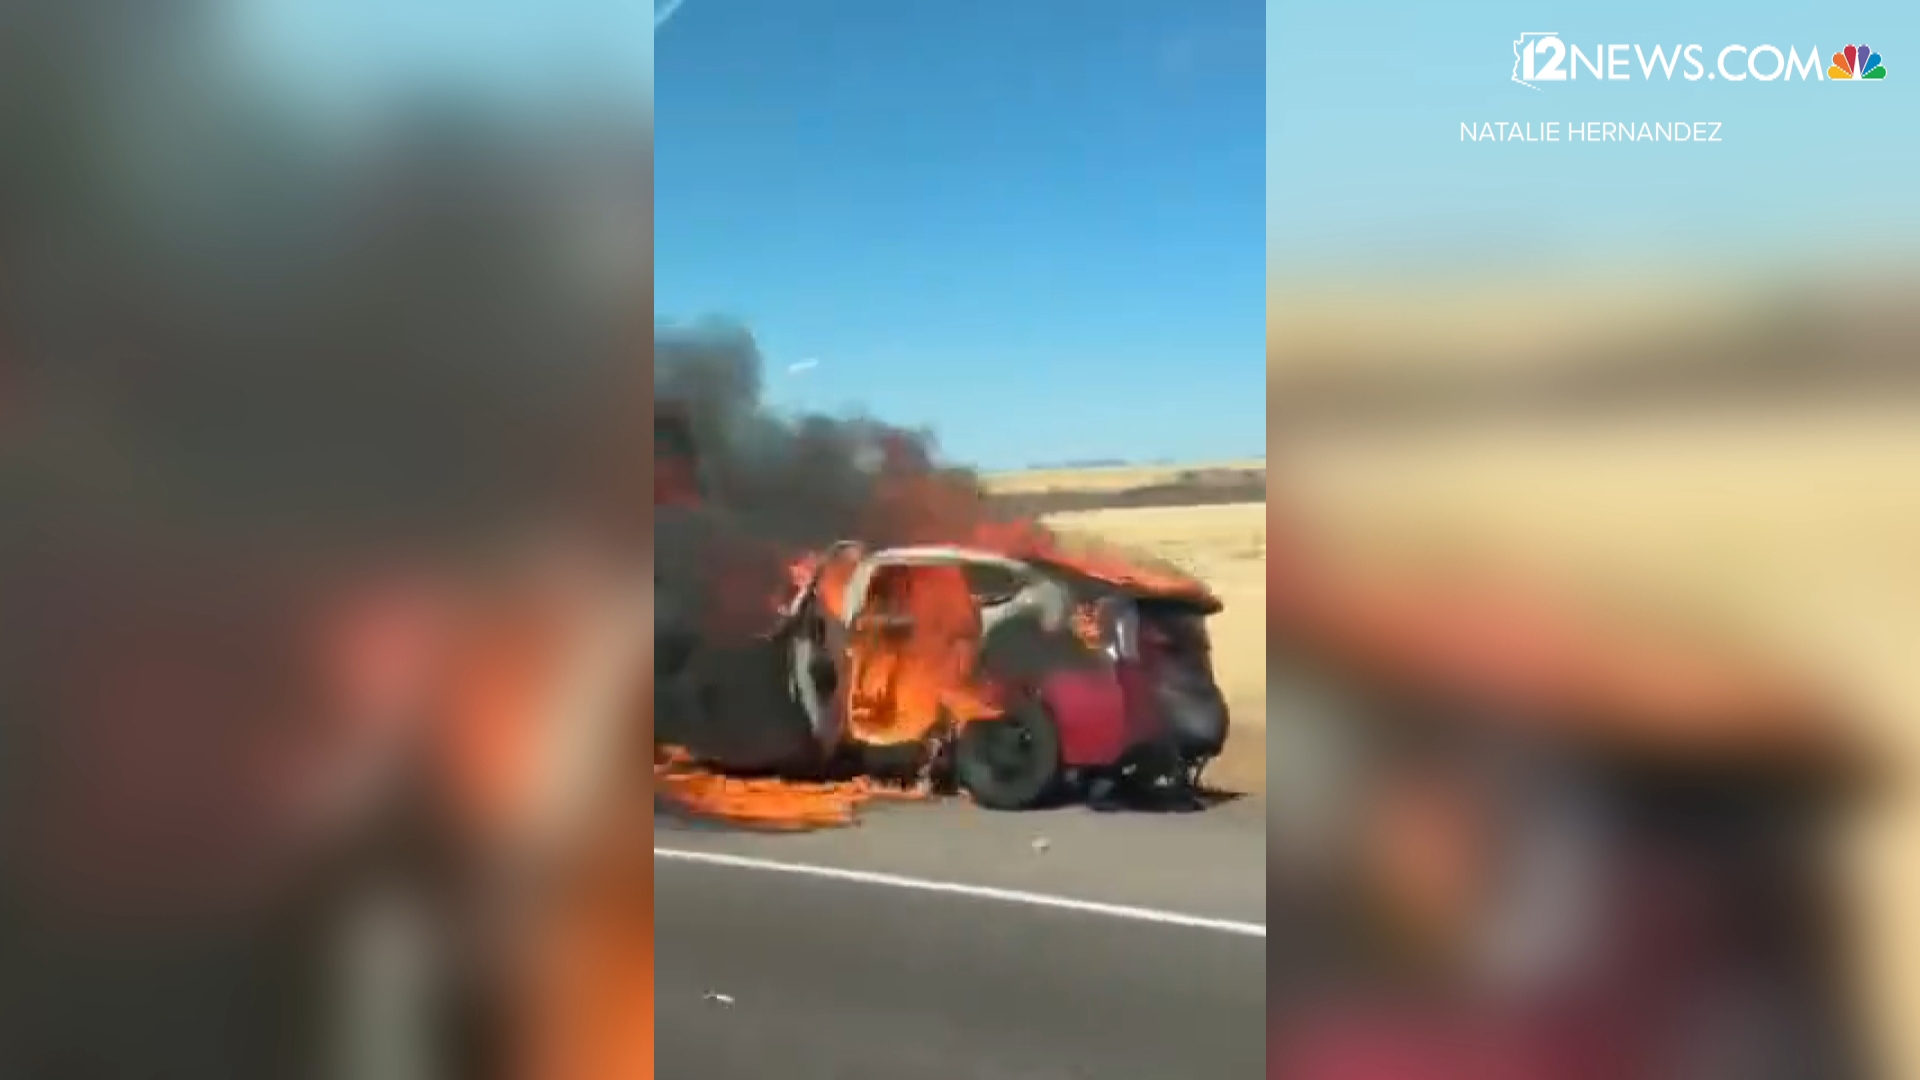 12News viewer Natalie Hernandez sent in this video of a car on fire near Sunset Point in Arizona on July 6. That fire sparked a brush fire.